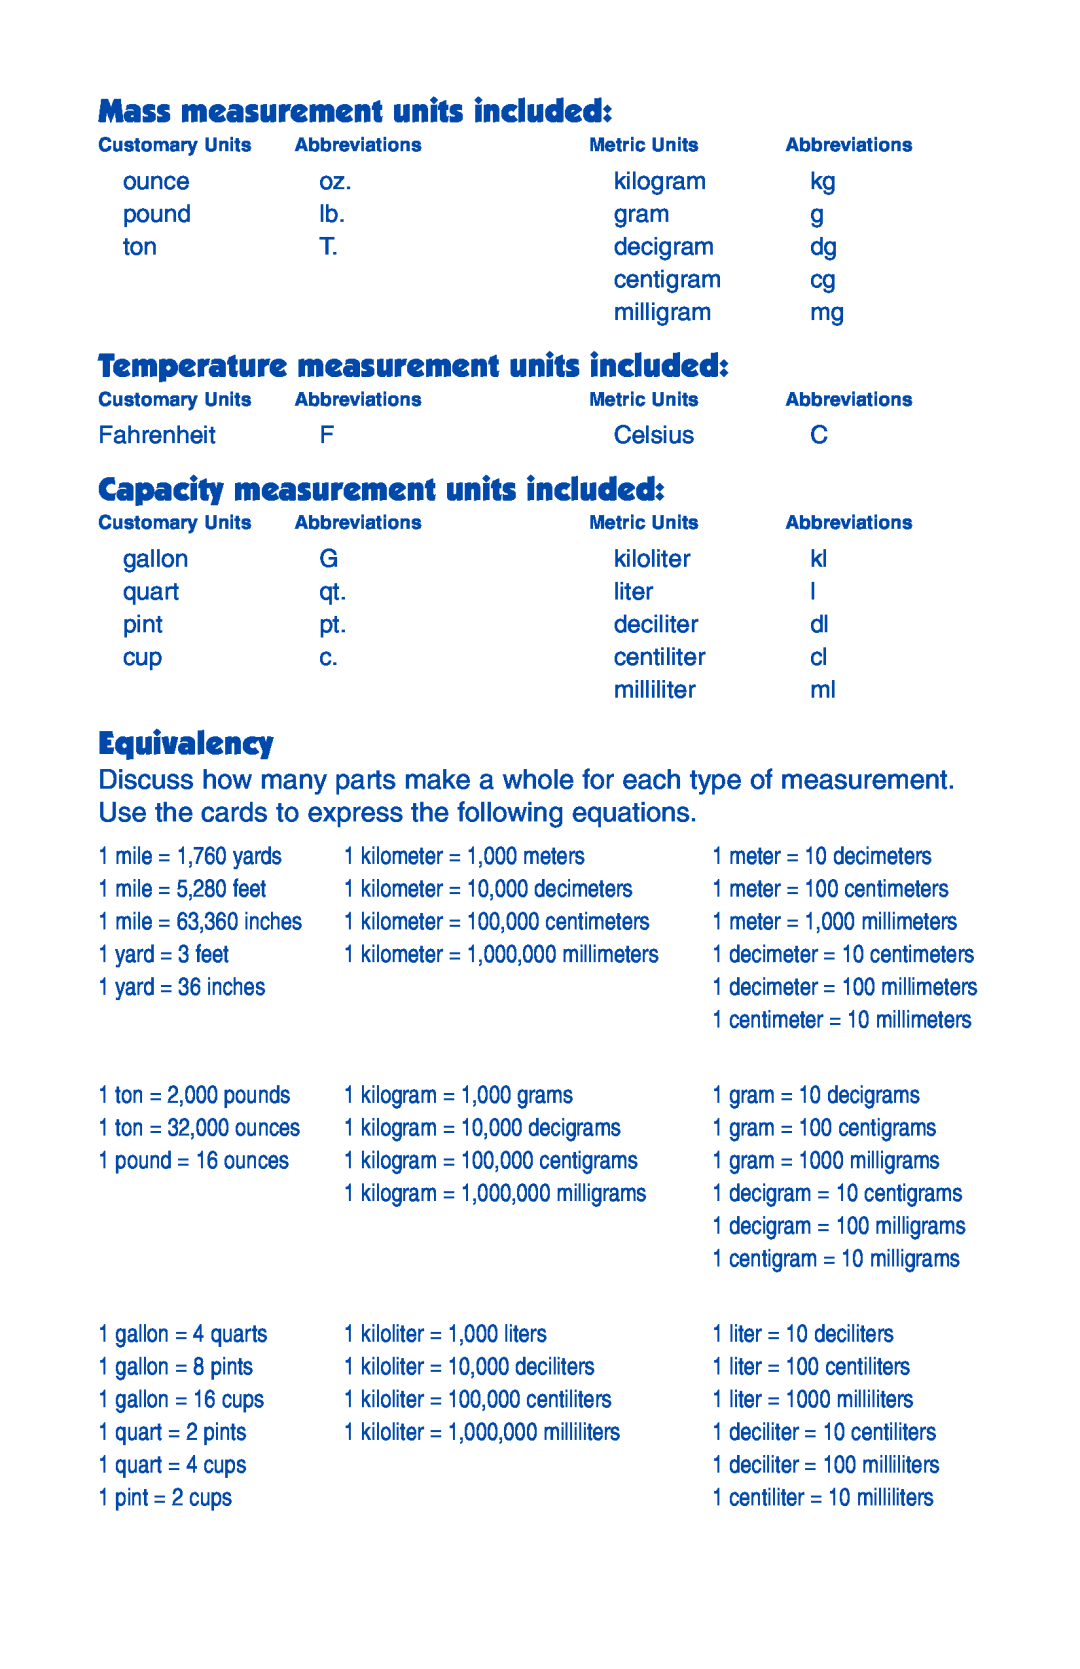 Learning Resources 2284 Mass measurement units included, Temperature measurement units included, Equivalency, Fahrenheit 